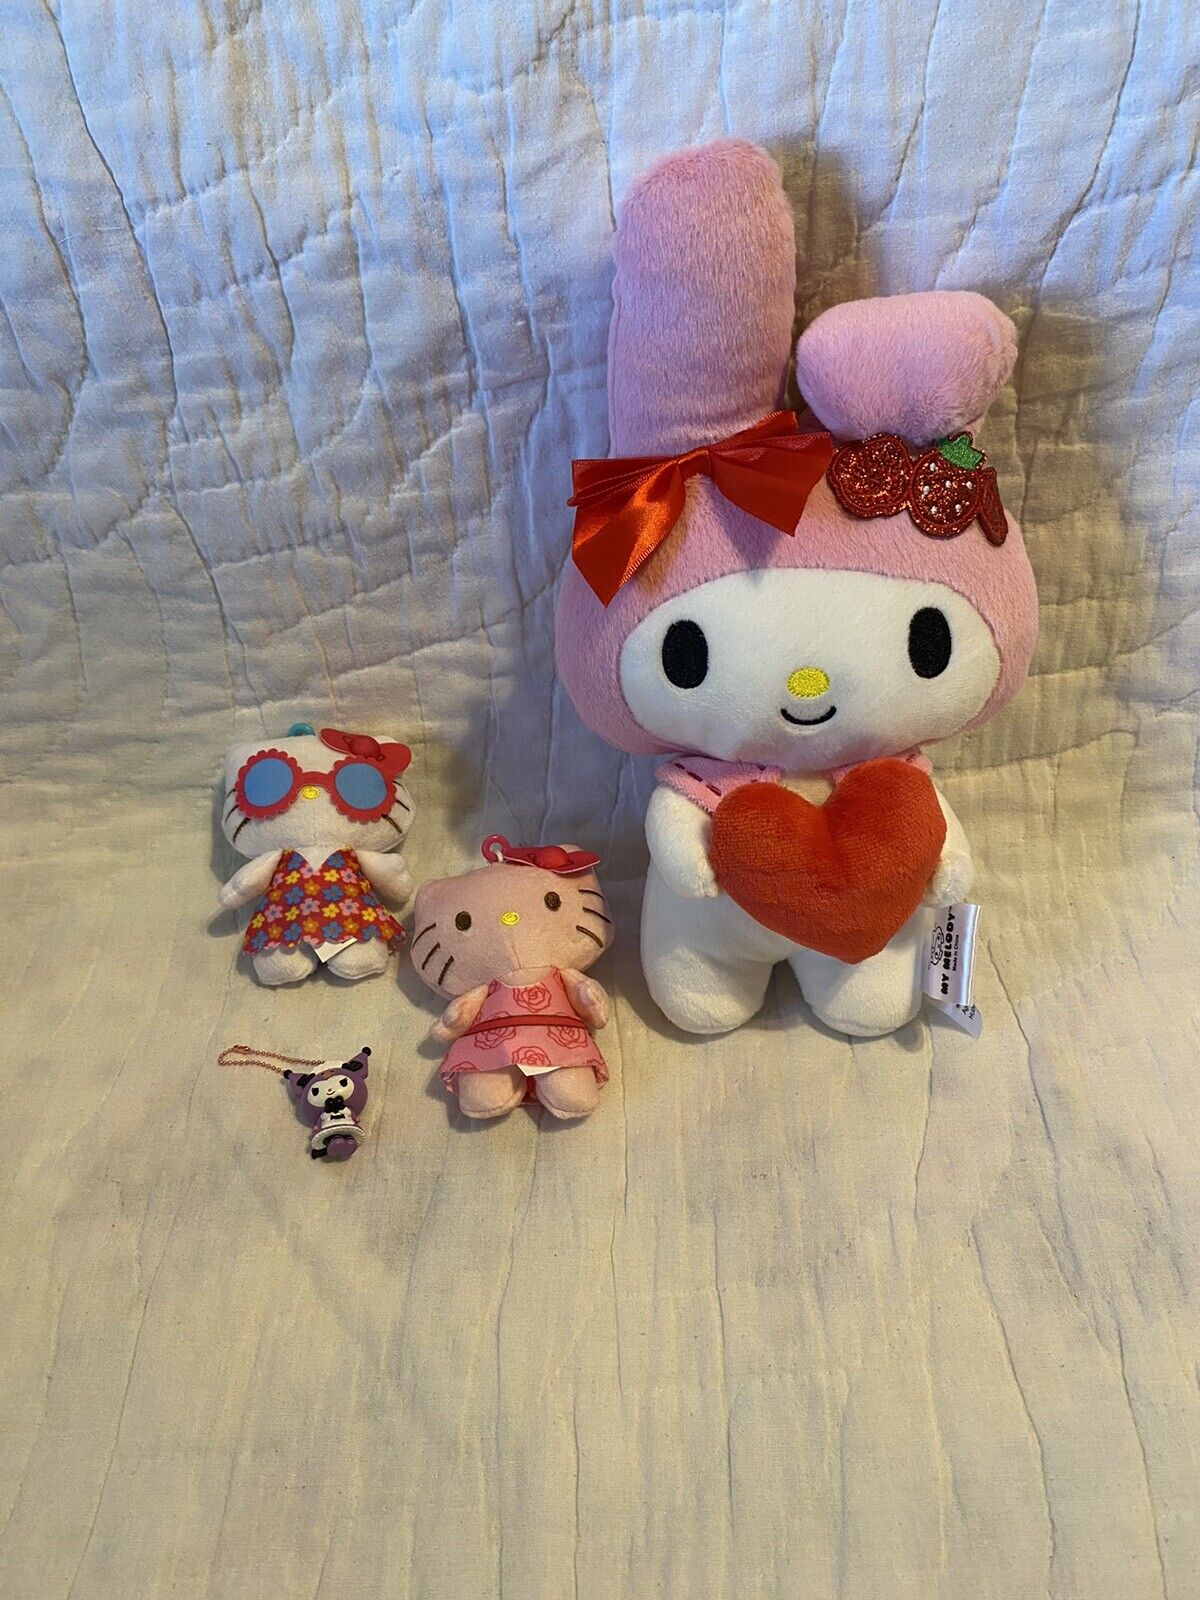 Hello Kitty Sanrio Lot - 3 Keychains and 1 Stuffed Animal - Great Condition